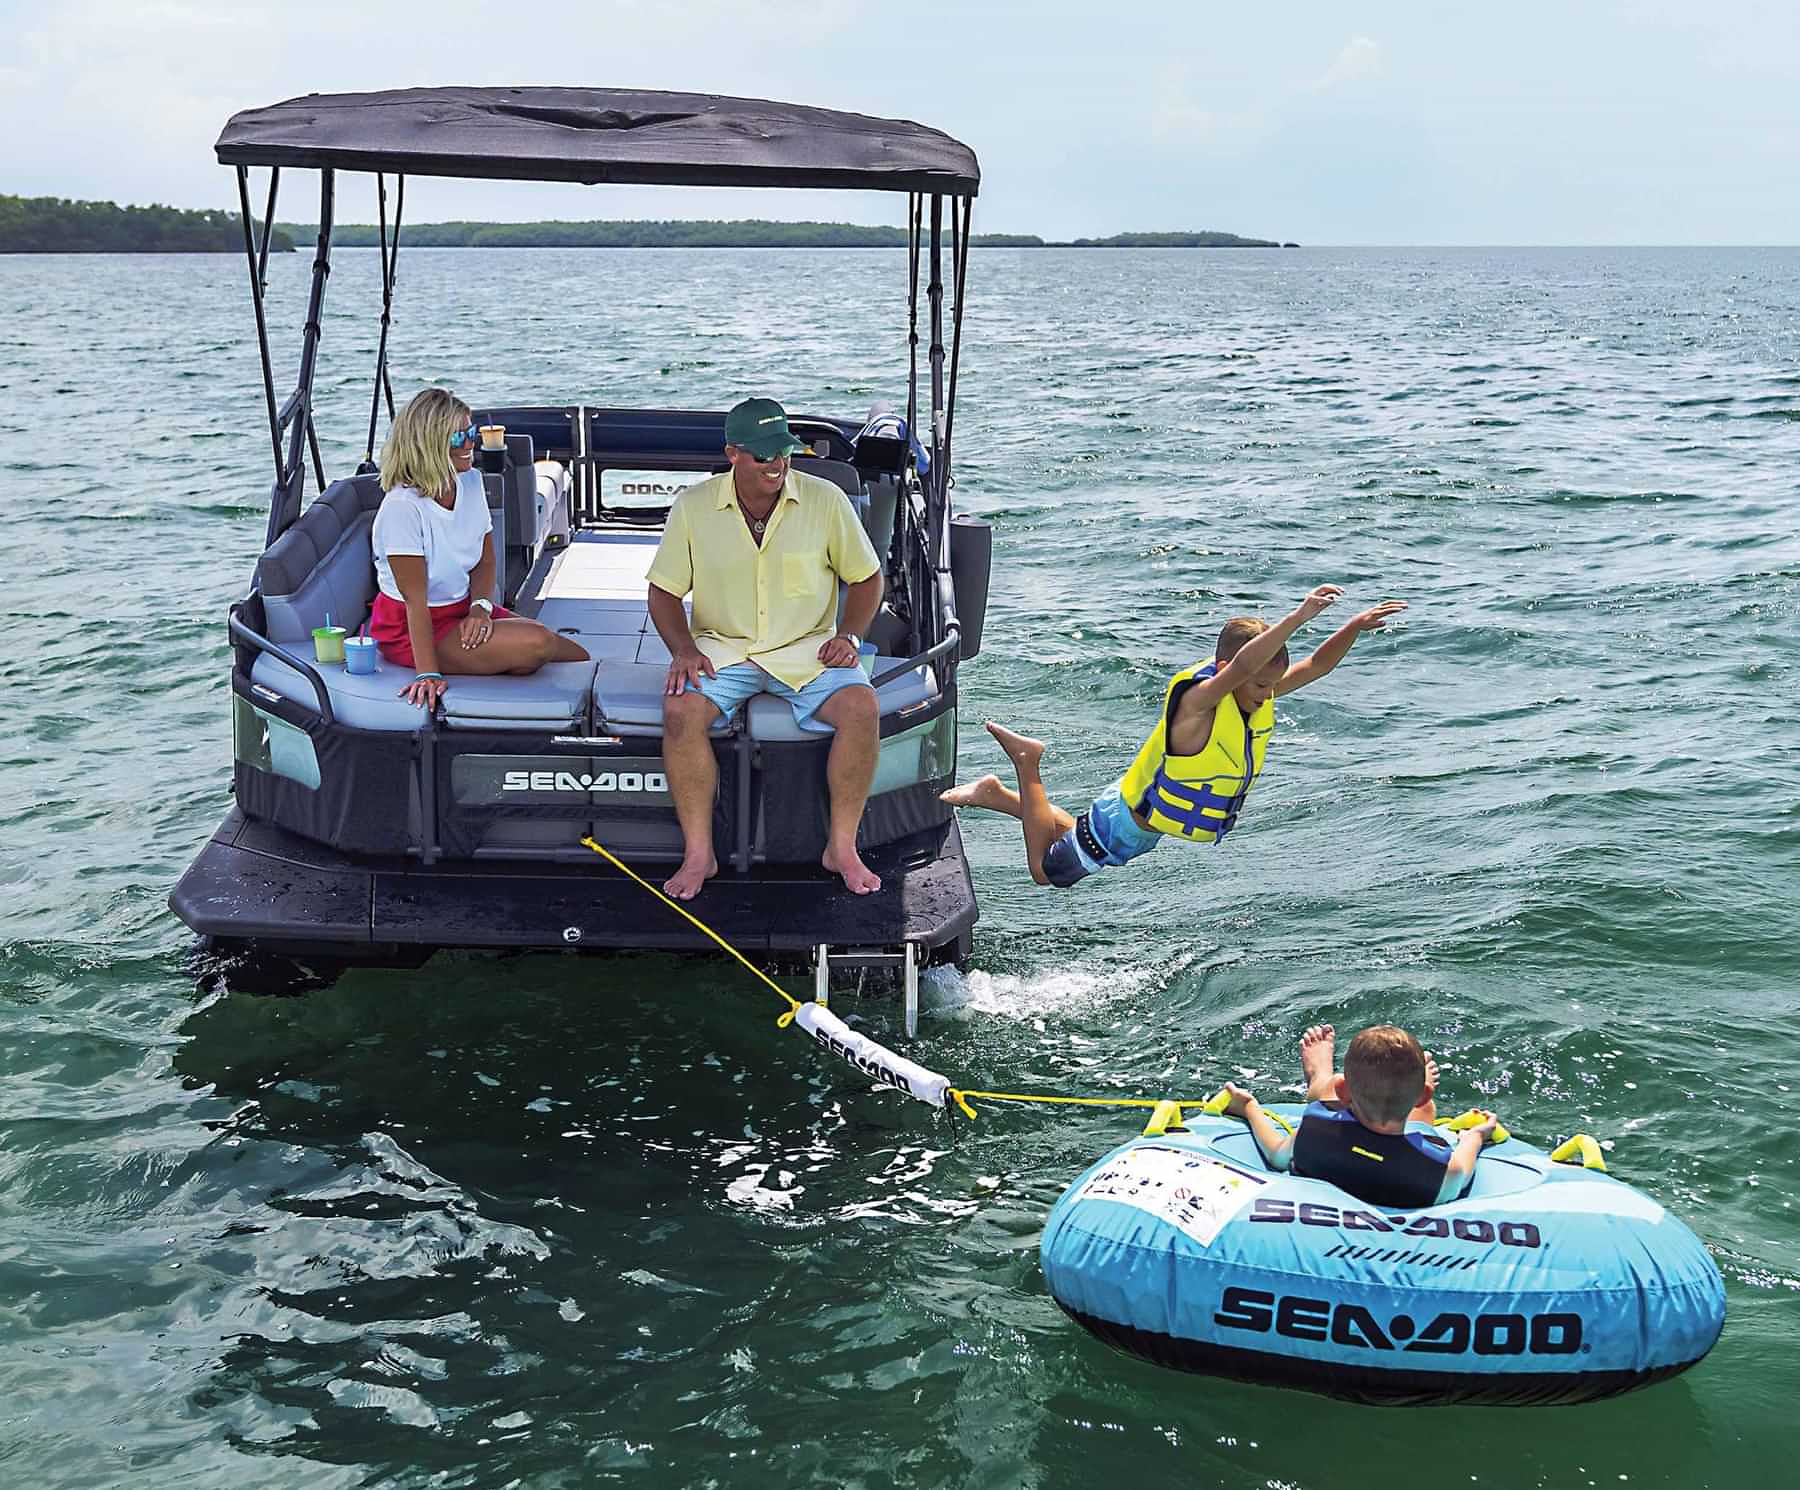 a man and woman smile and watch from the rear seating of a Sea-Doo pontoon as a young boy wearing a life jacket jumps into the water next to another young boy, also wearing a life jacket and relaxing in a Sea-Doo inner tube tethered to the rear of the pontoon